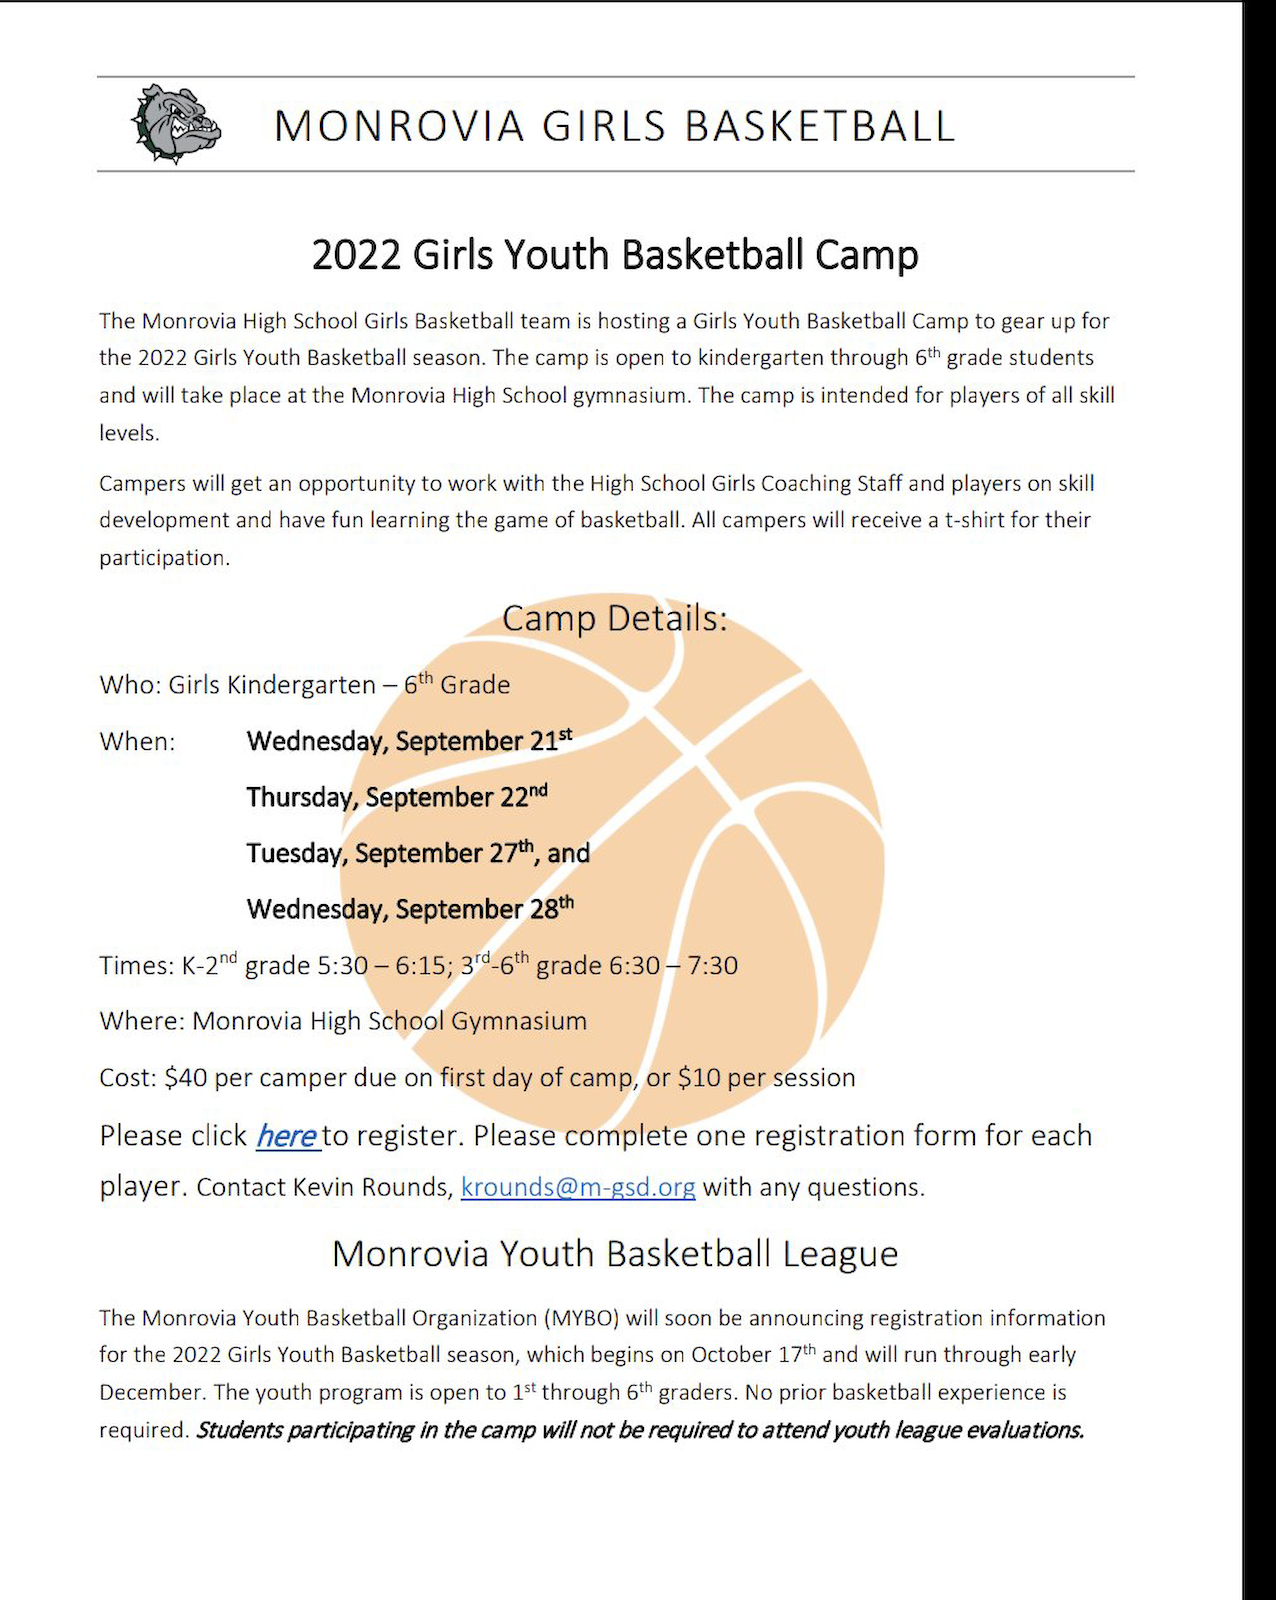 Girls Youth Basketball Camp cover photo